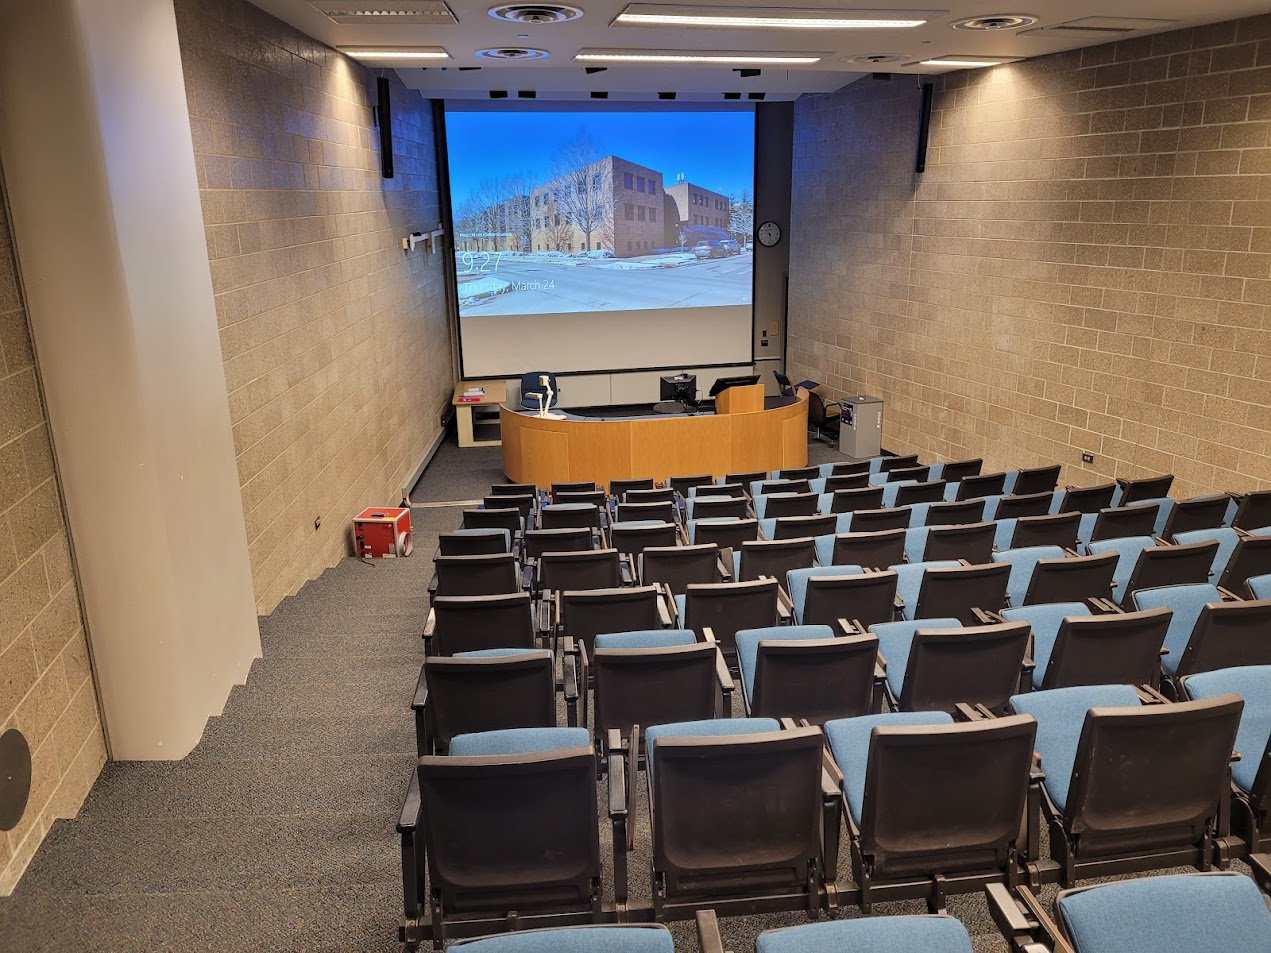 A view of the classroom with theater auditorium seating, white boards, and large lectern in front.